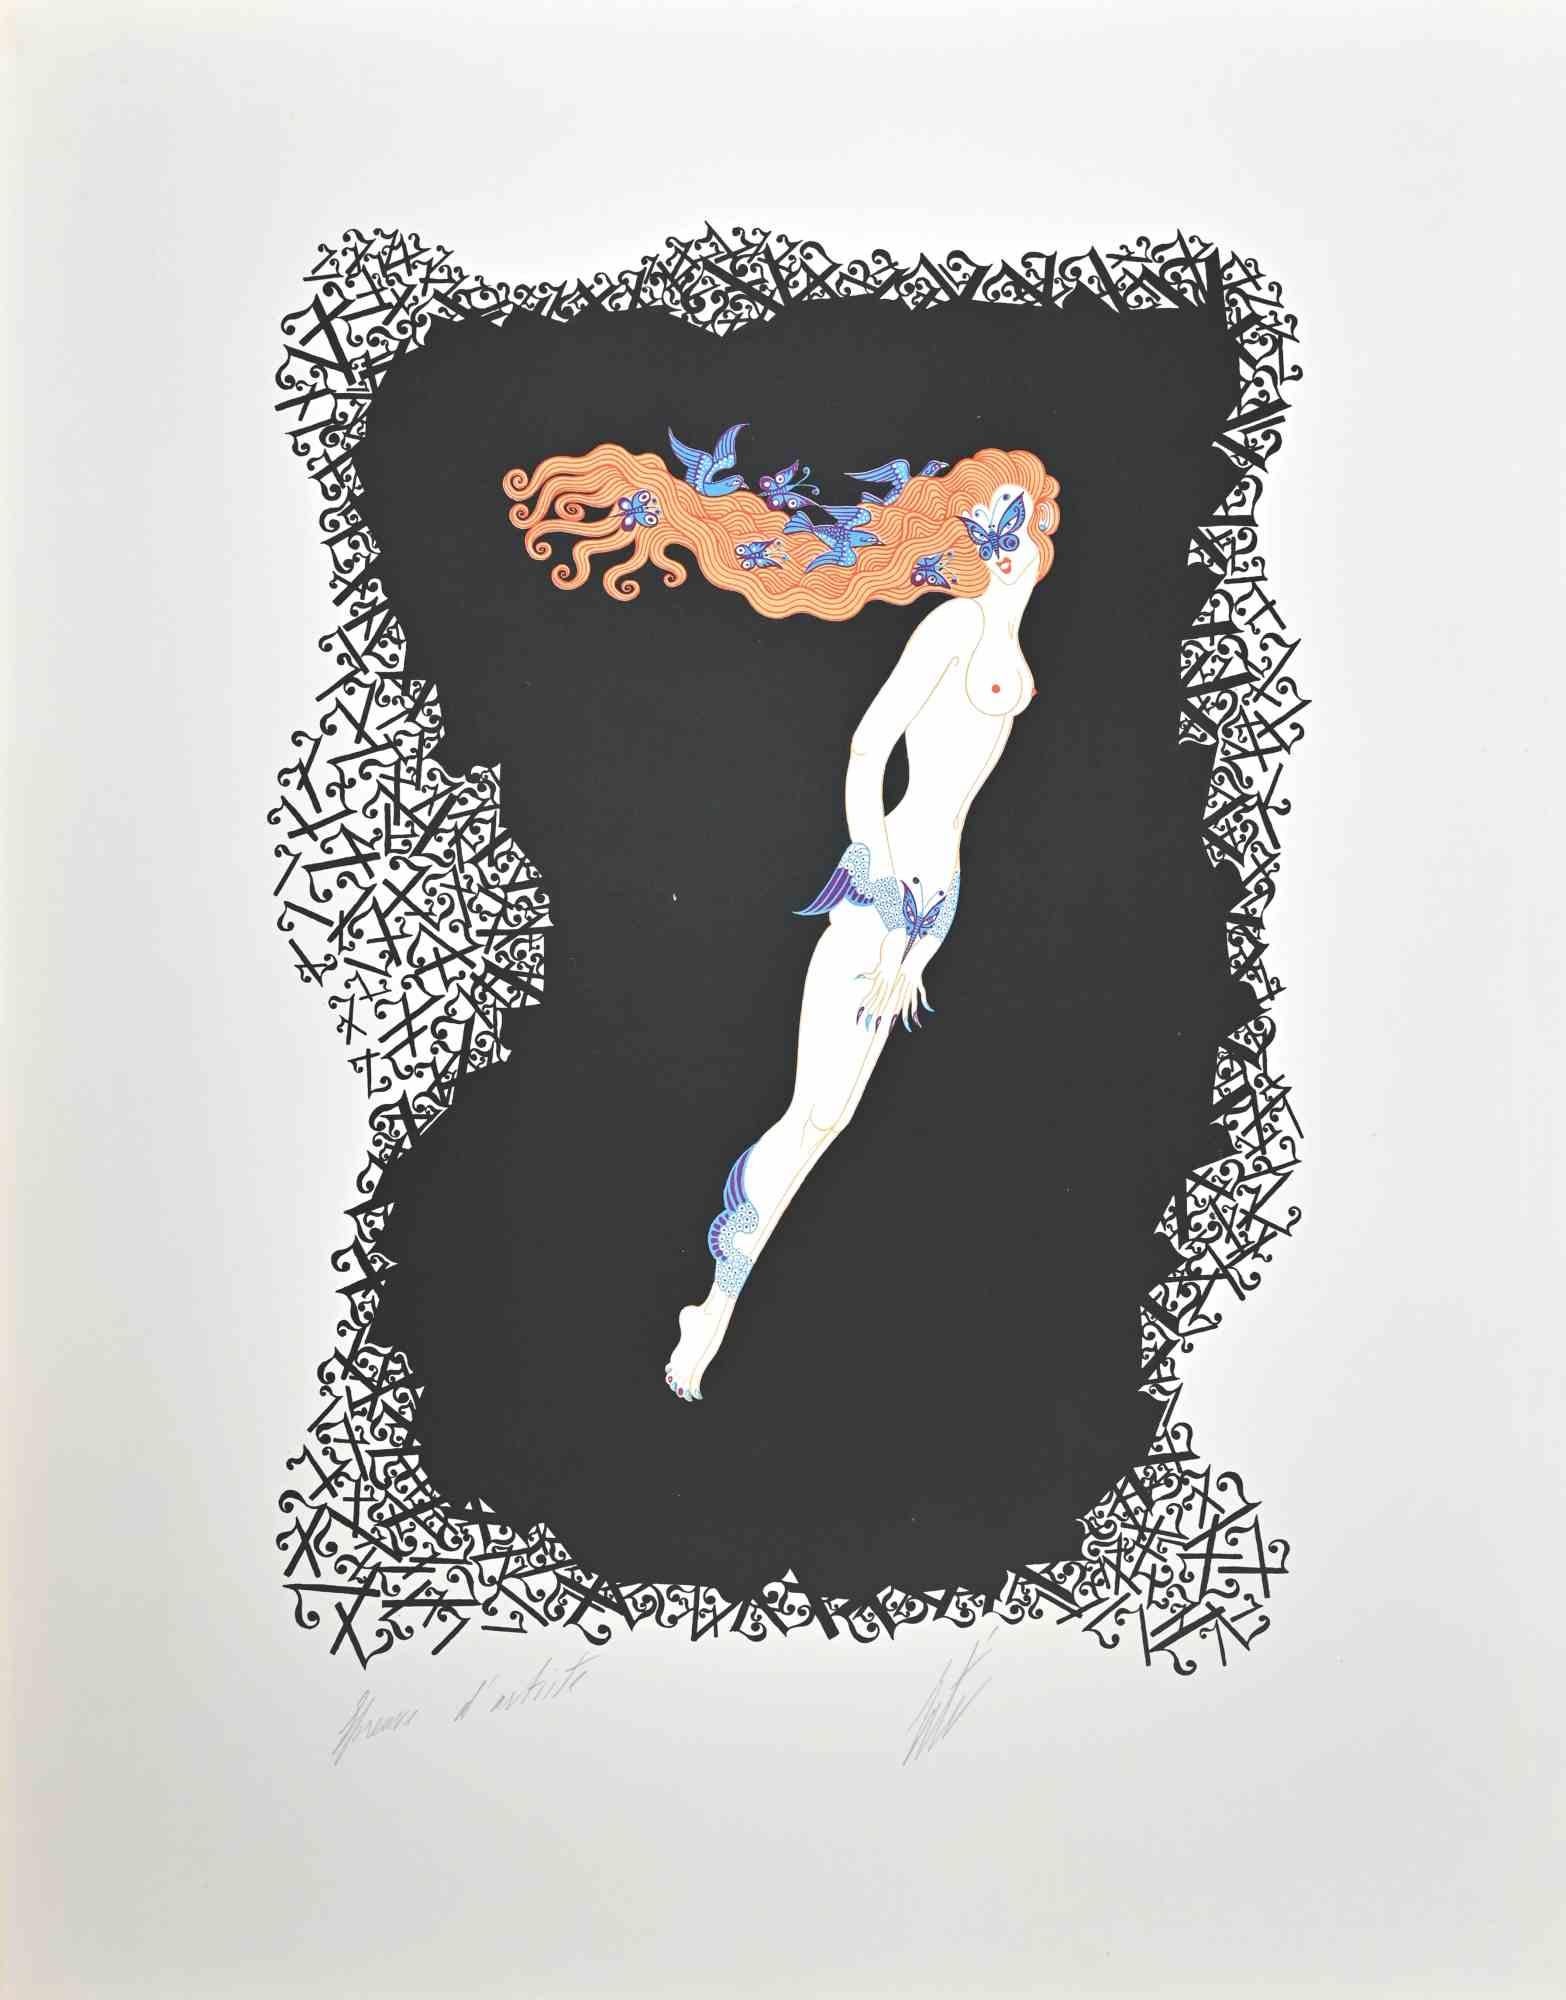 Le 7 is a contemporary artwork realized in 1970s by Erté (Romain de Tirtoff).

Mixed colored lithograph on paper.

The artwork is from the Series "Les Chiffres".

Hand signed on the lower margin.

Artist's proof.

Good conditions

Provenance: